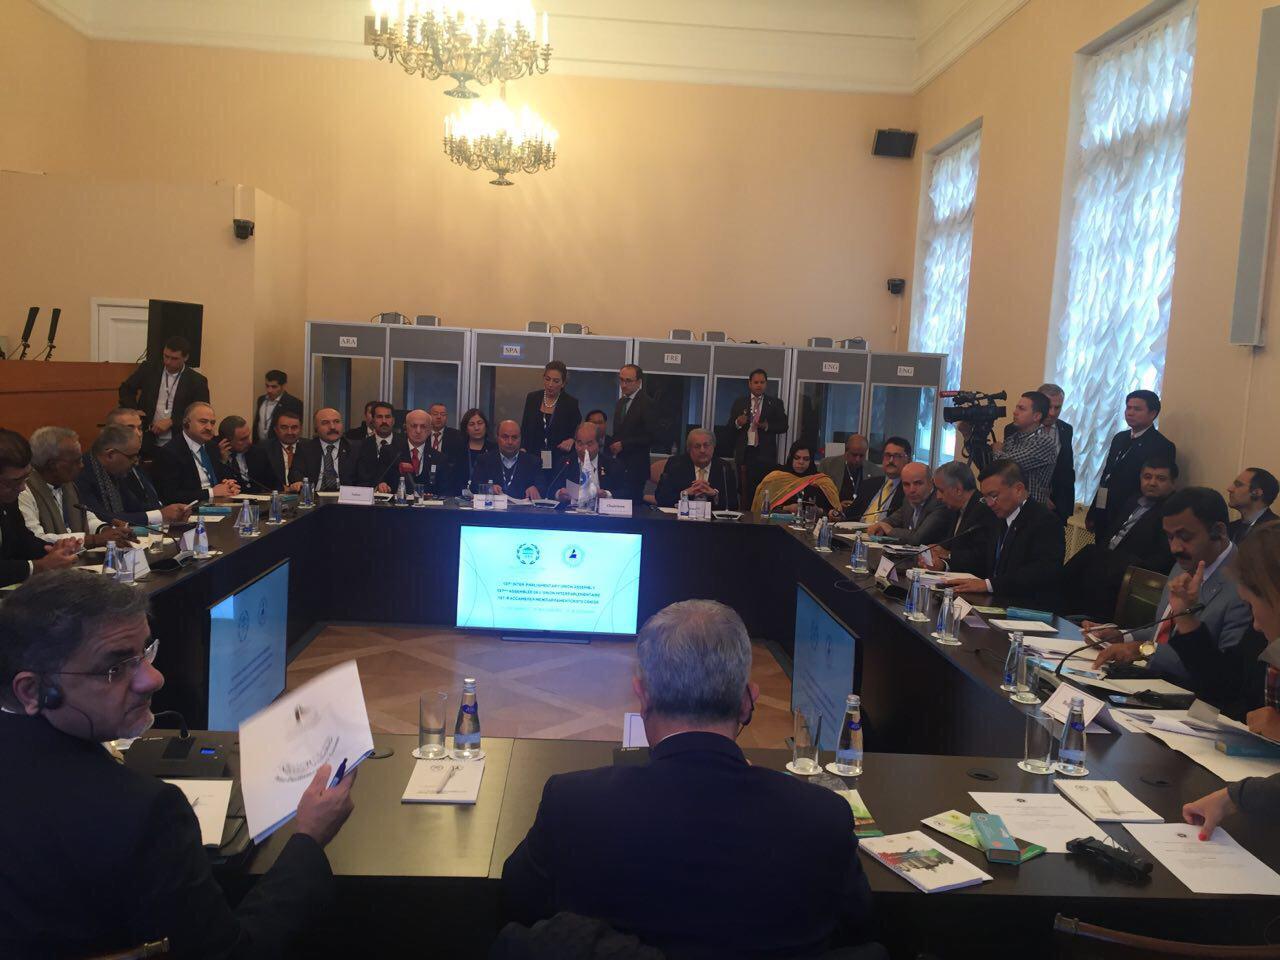 APA Coordination and Cooperation meeting on the sideline of 137th IPU Assembly in St. Petersburg – Russian Federation